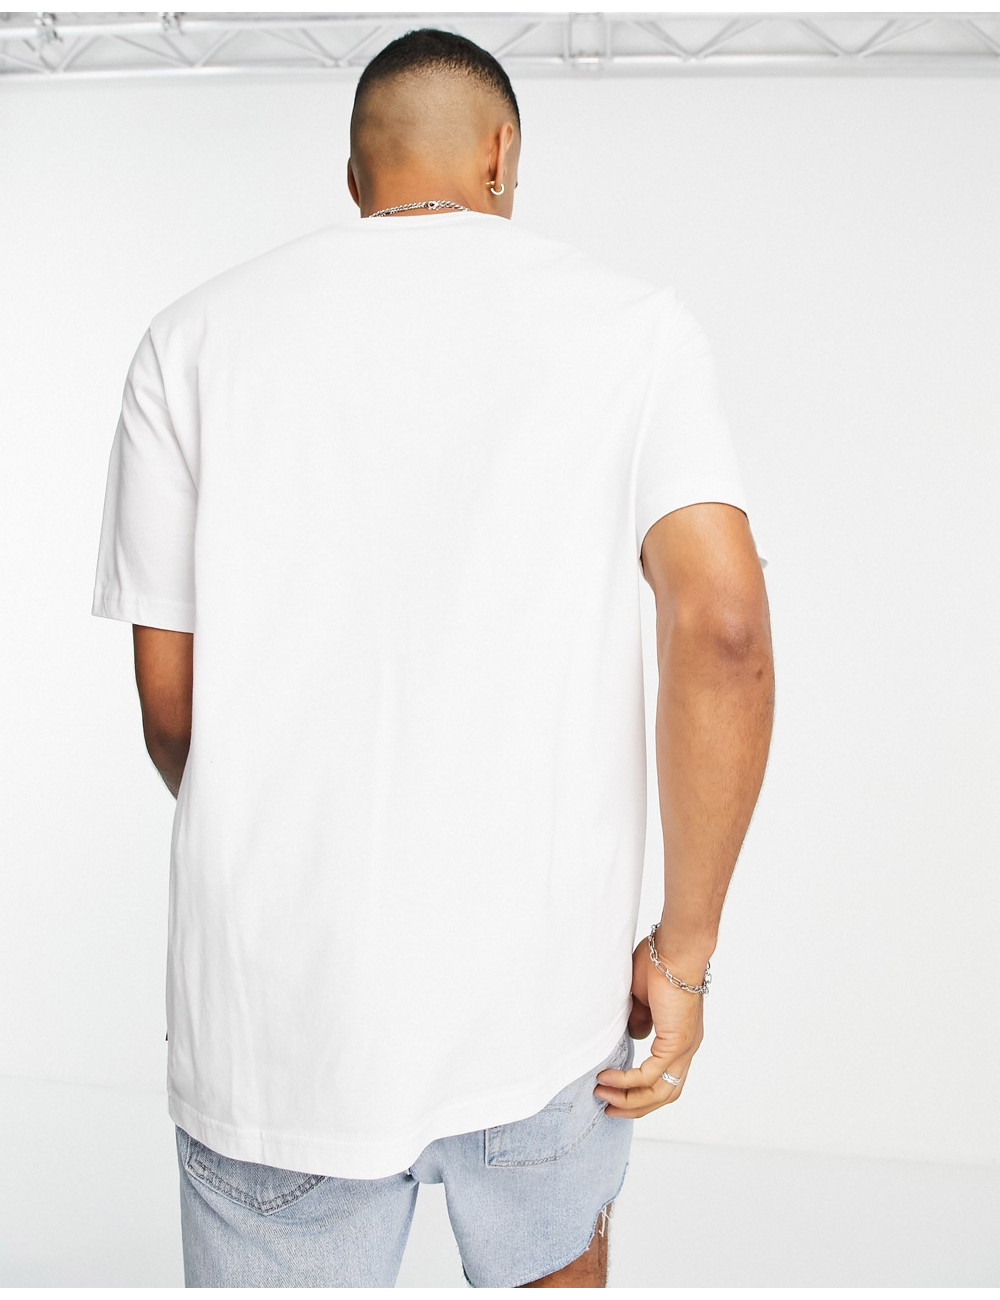 Levi's relaxed fit t-shirt...